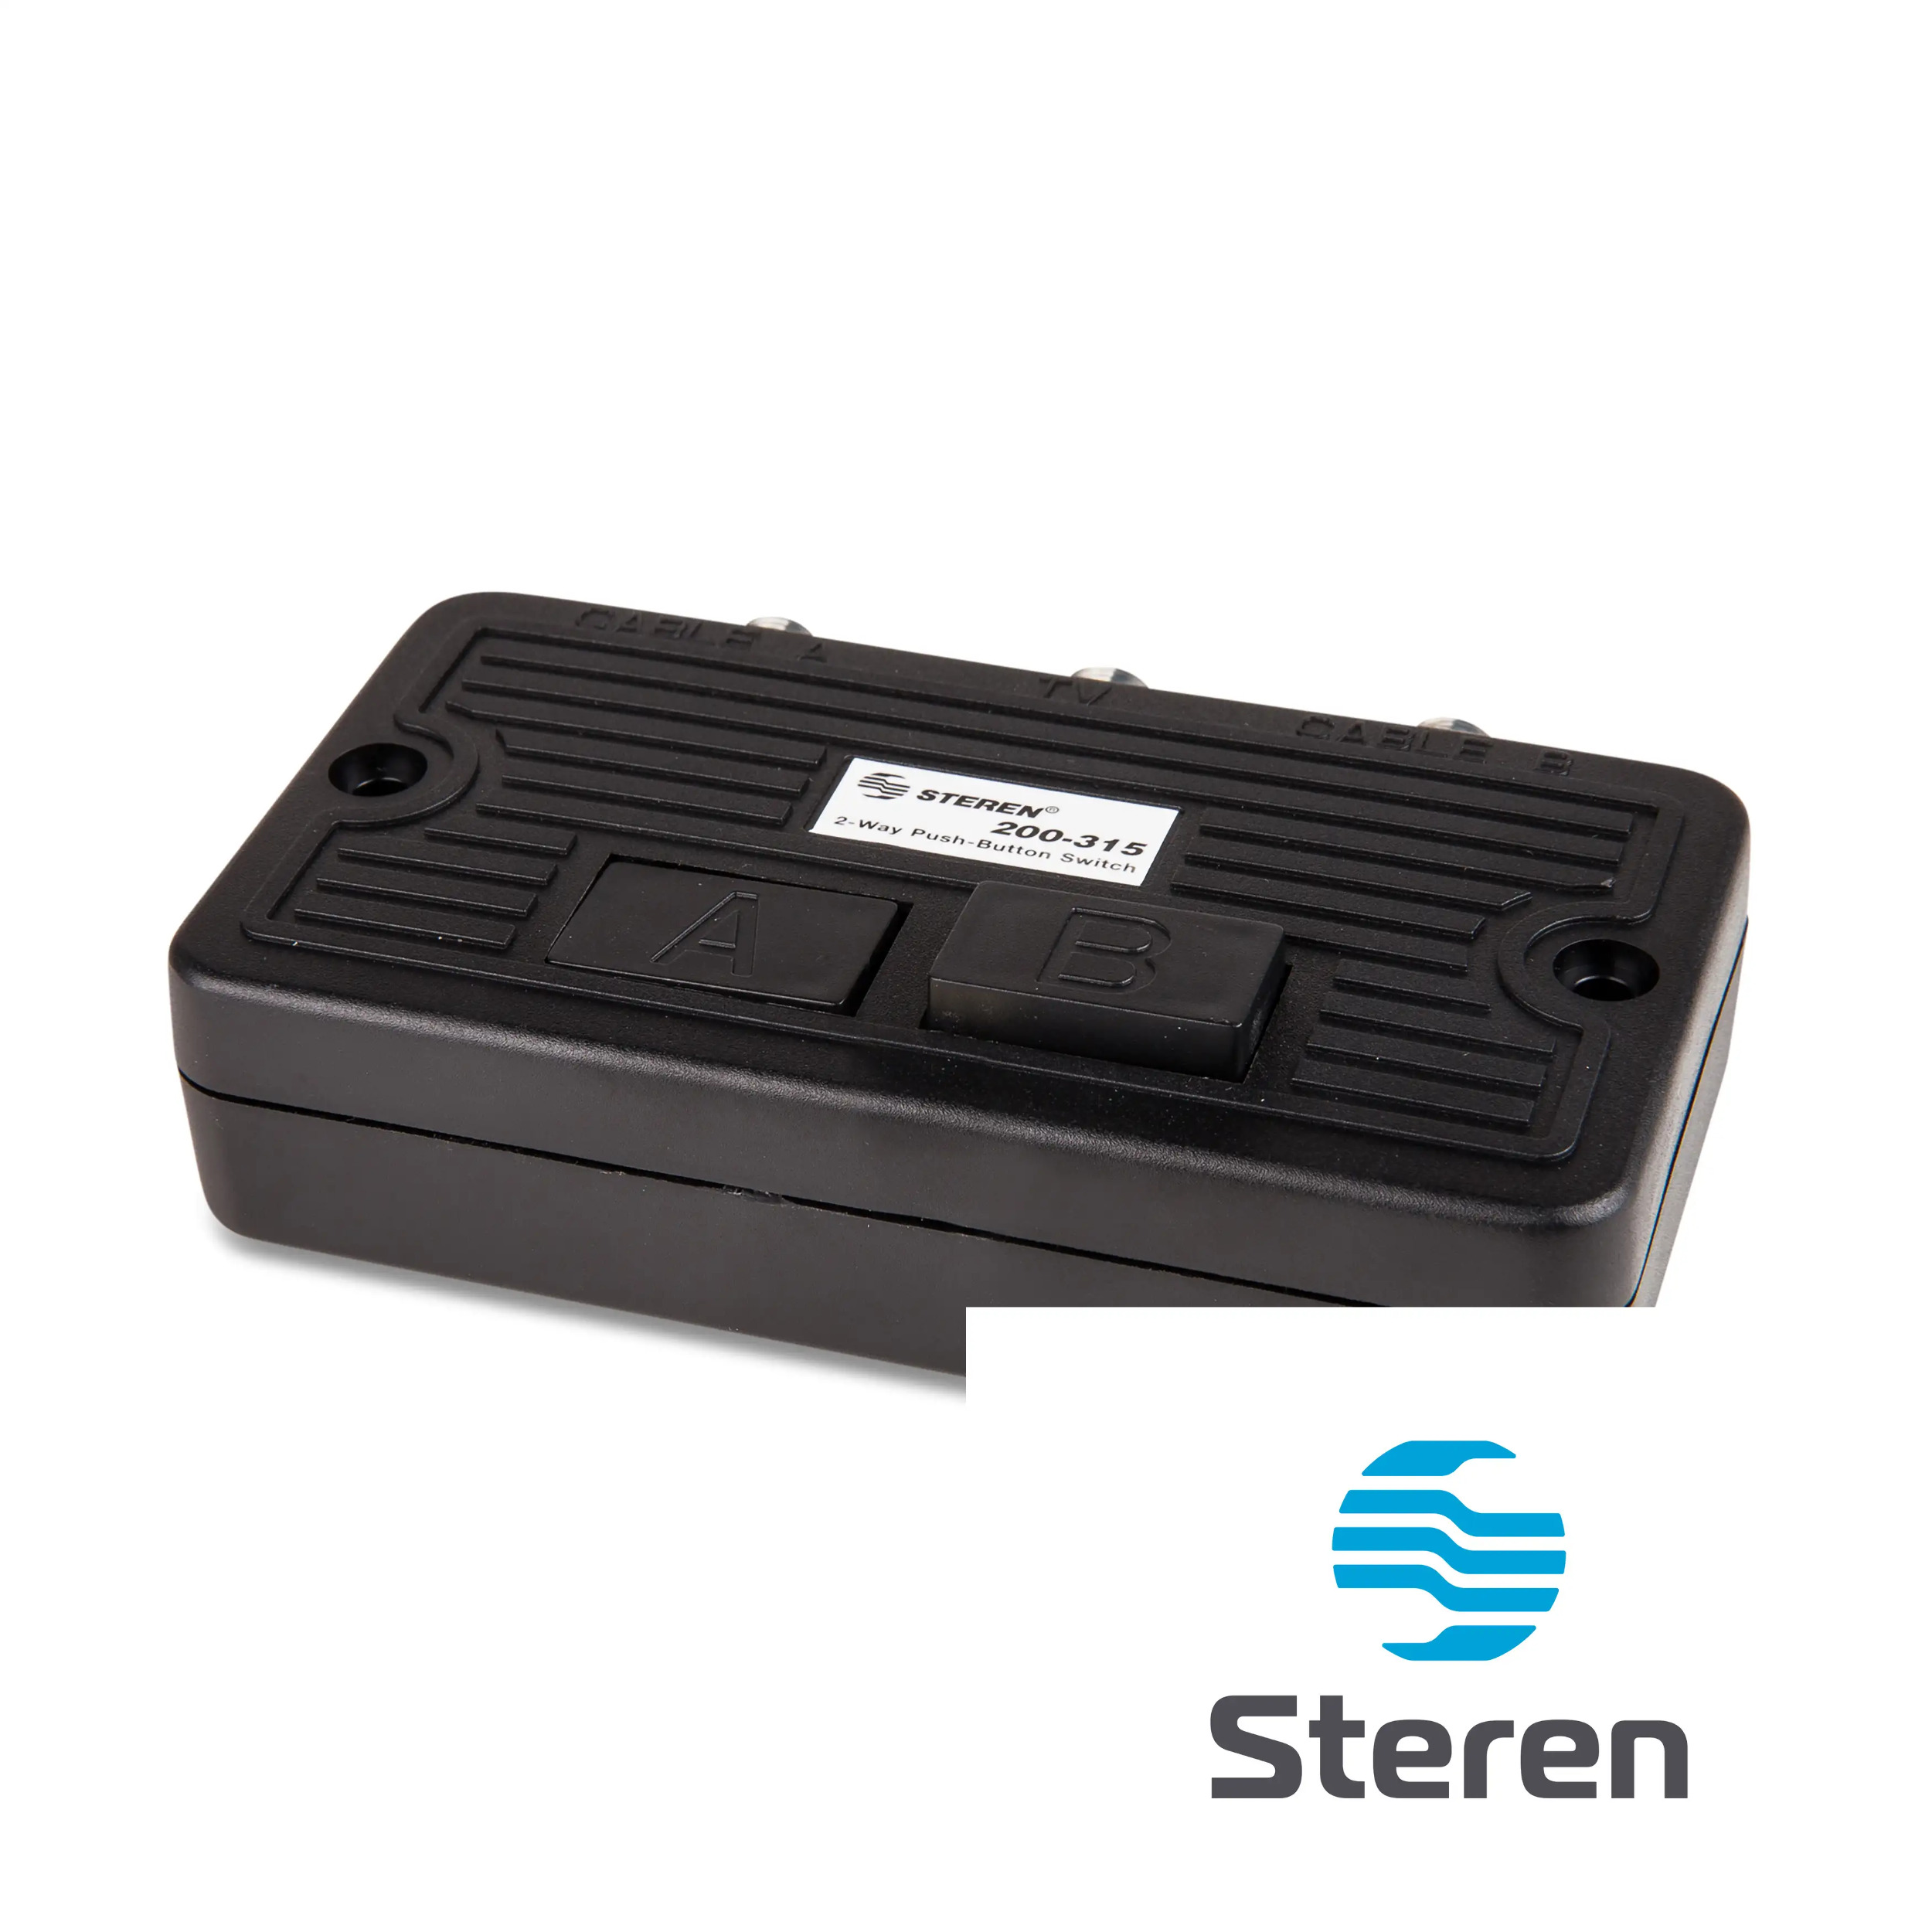 Steren 2-Way Coaxial A/B Push-Button Switch for TV, Antenna Splitter - 200-315 - image 2 of 4